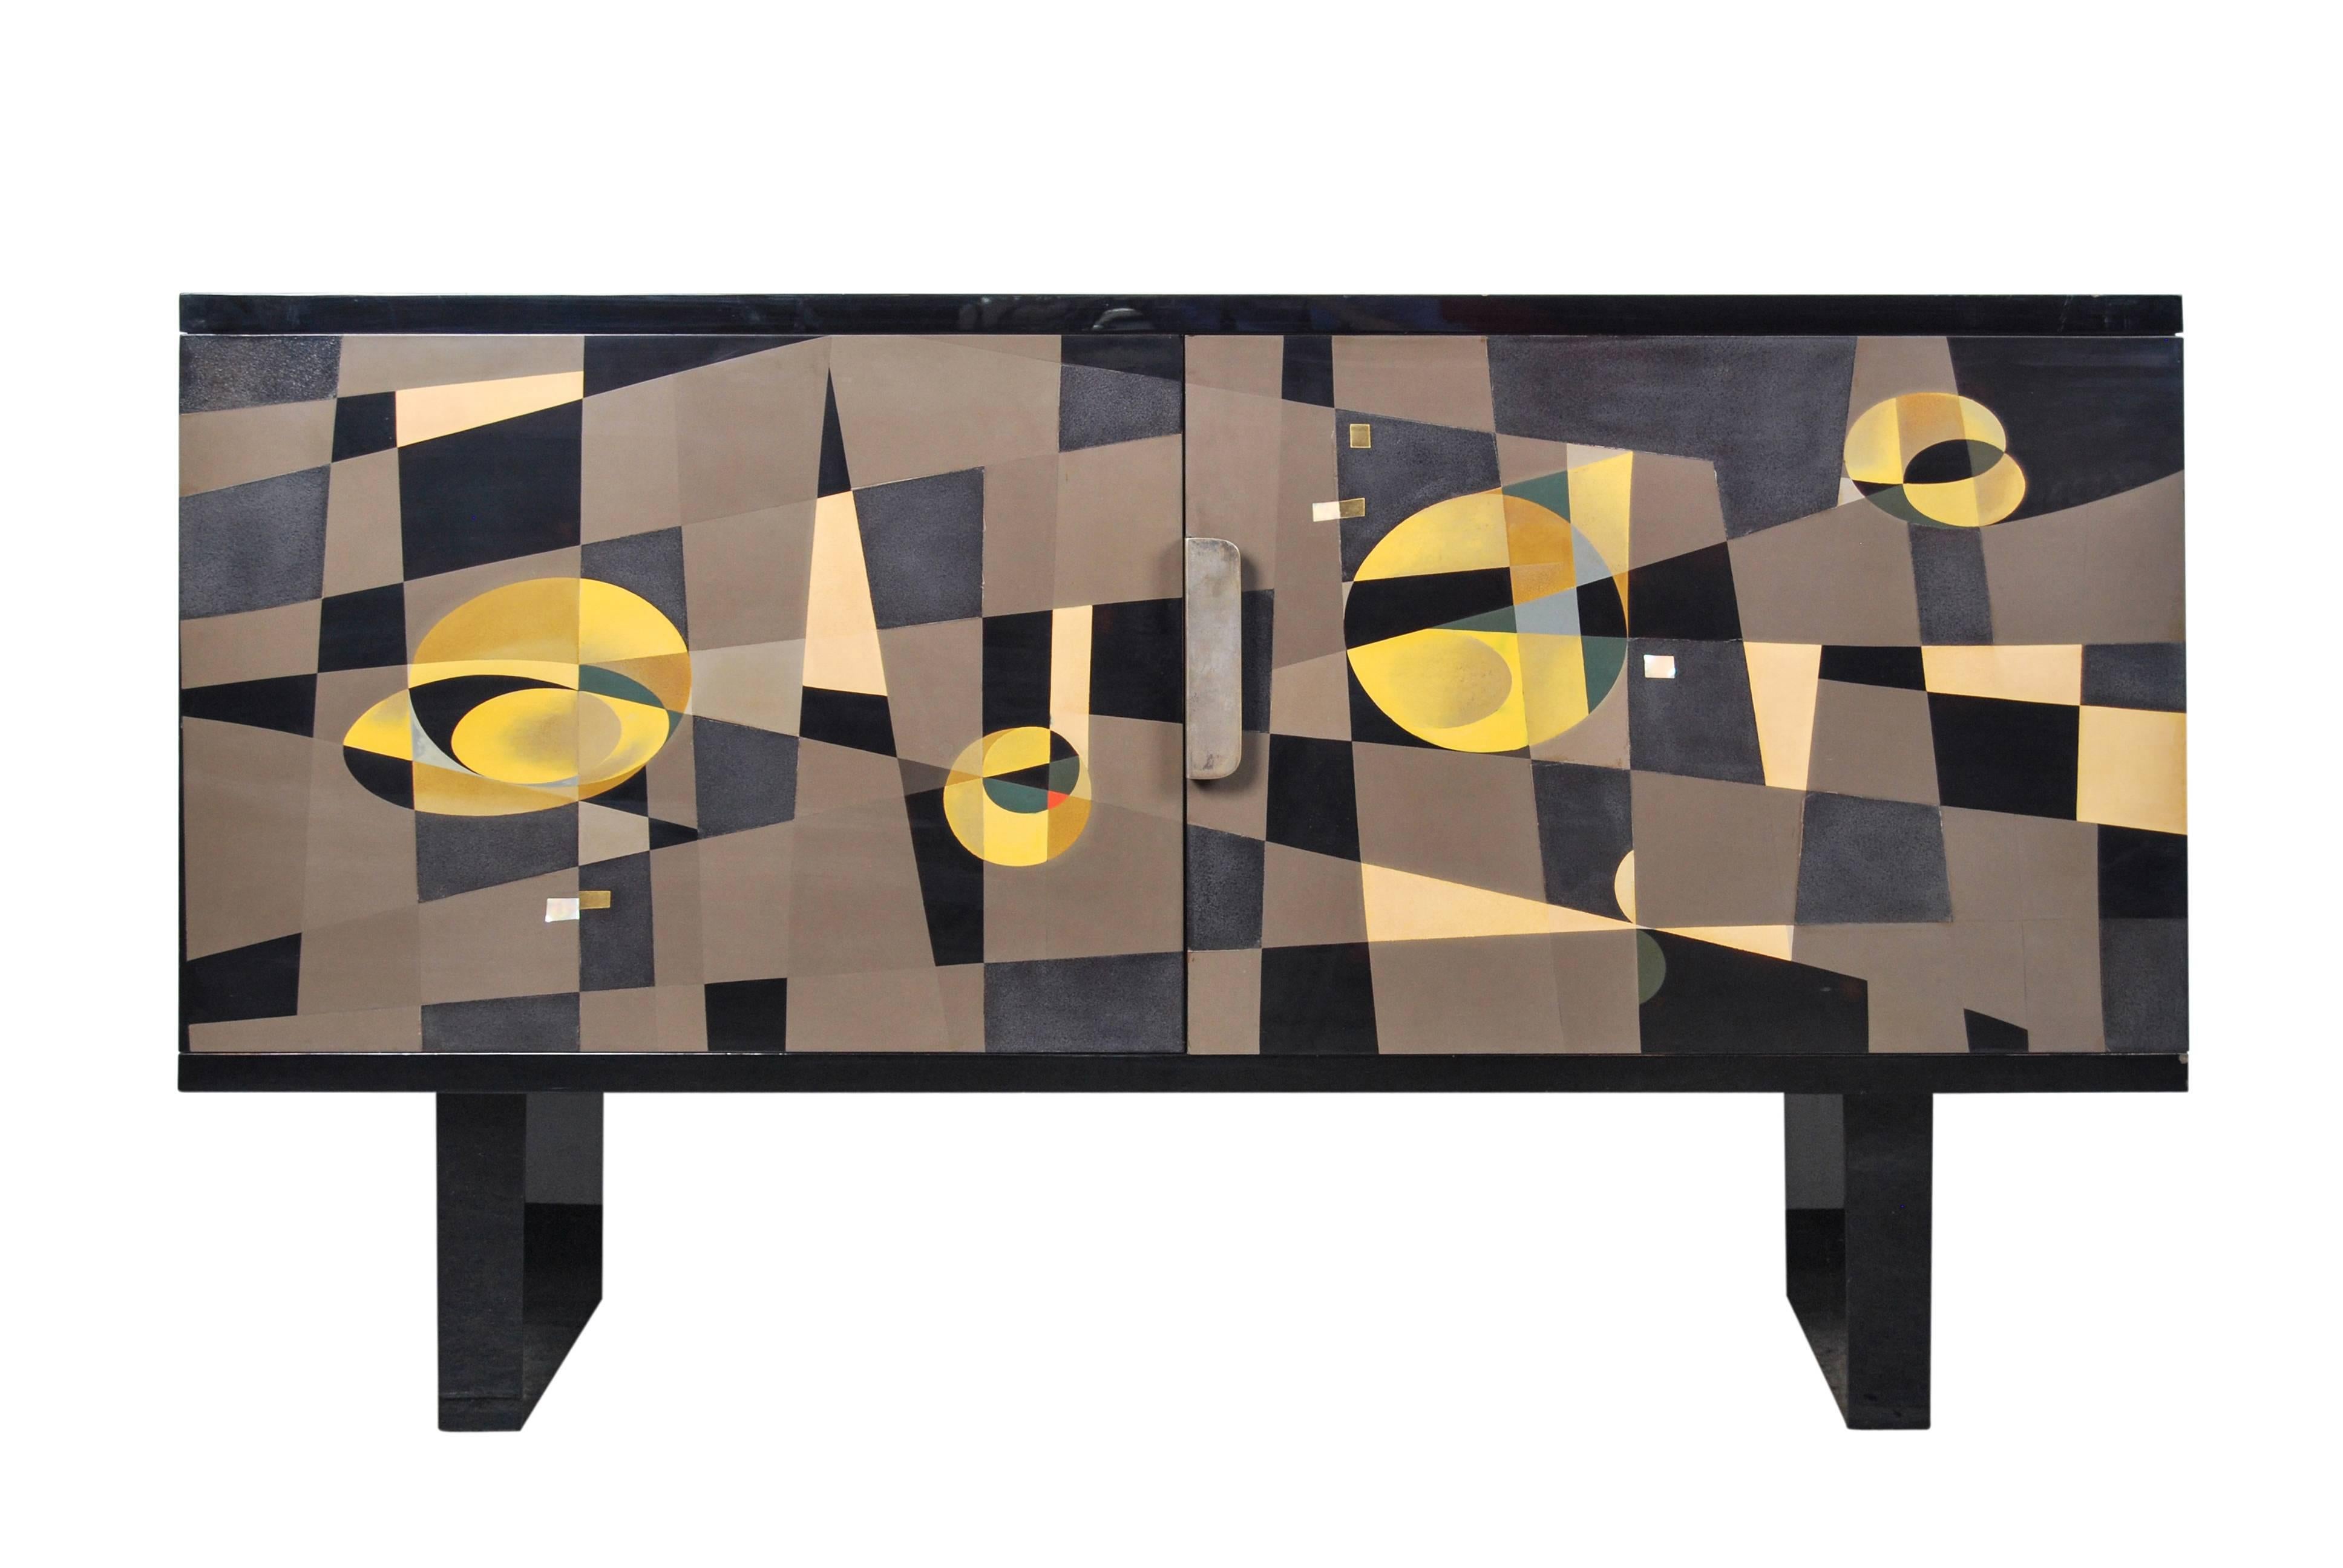 Rare Japanese black lacquered two-door cabinet decorated with a striking geometric pattern rendered in multi colored pigmented lacquer, mother-of-pearl and brass inlays. 

Dimensions: H 74cm x W 125.5cm x D 40cm

Overall good condition aside